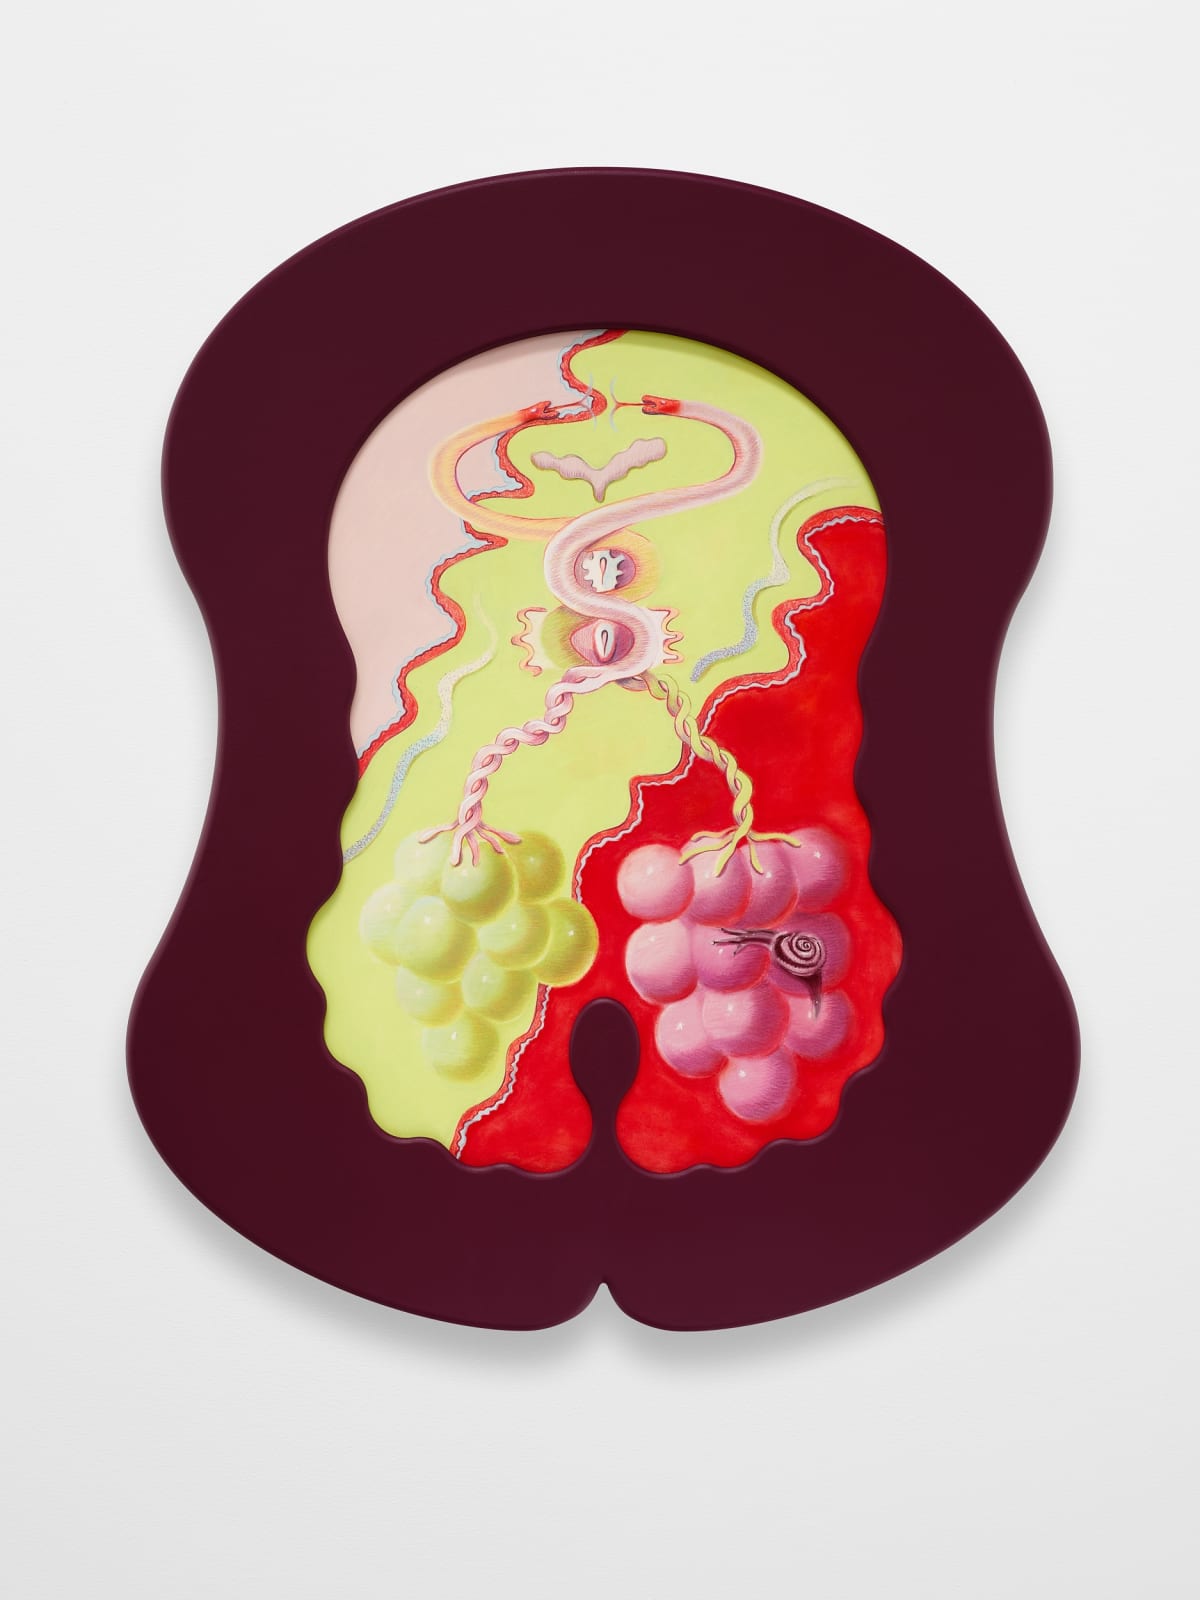 Pastel drawing showing two bunches of snail-infested grapes for ovaries. The dark maroon and symmetrical curved<br>custom artist’s frame is reminiscent of bodily forms that are<br>distinctly female.